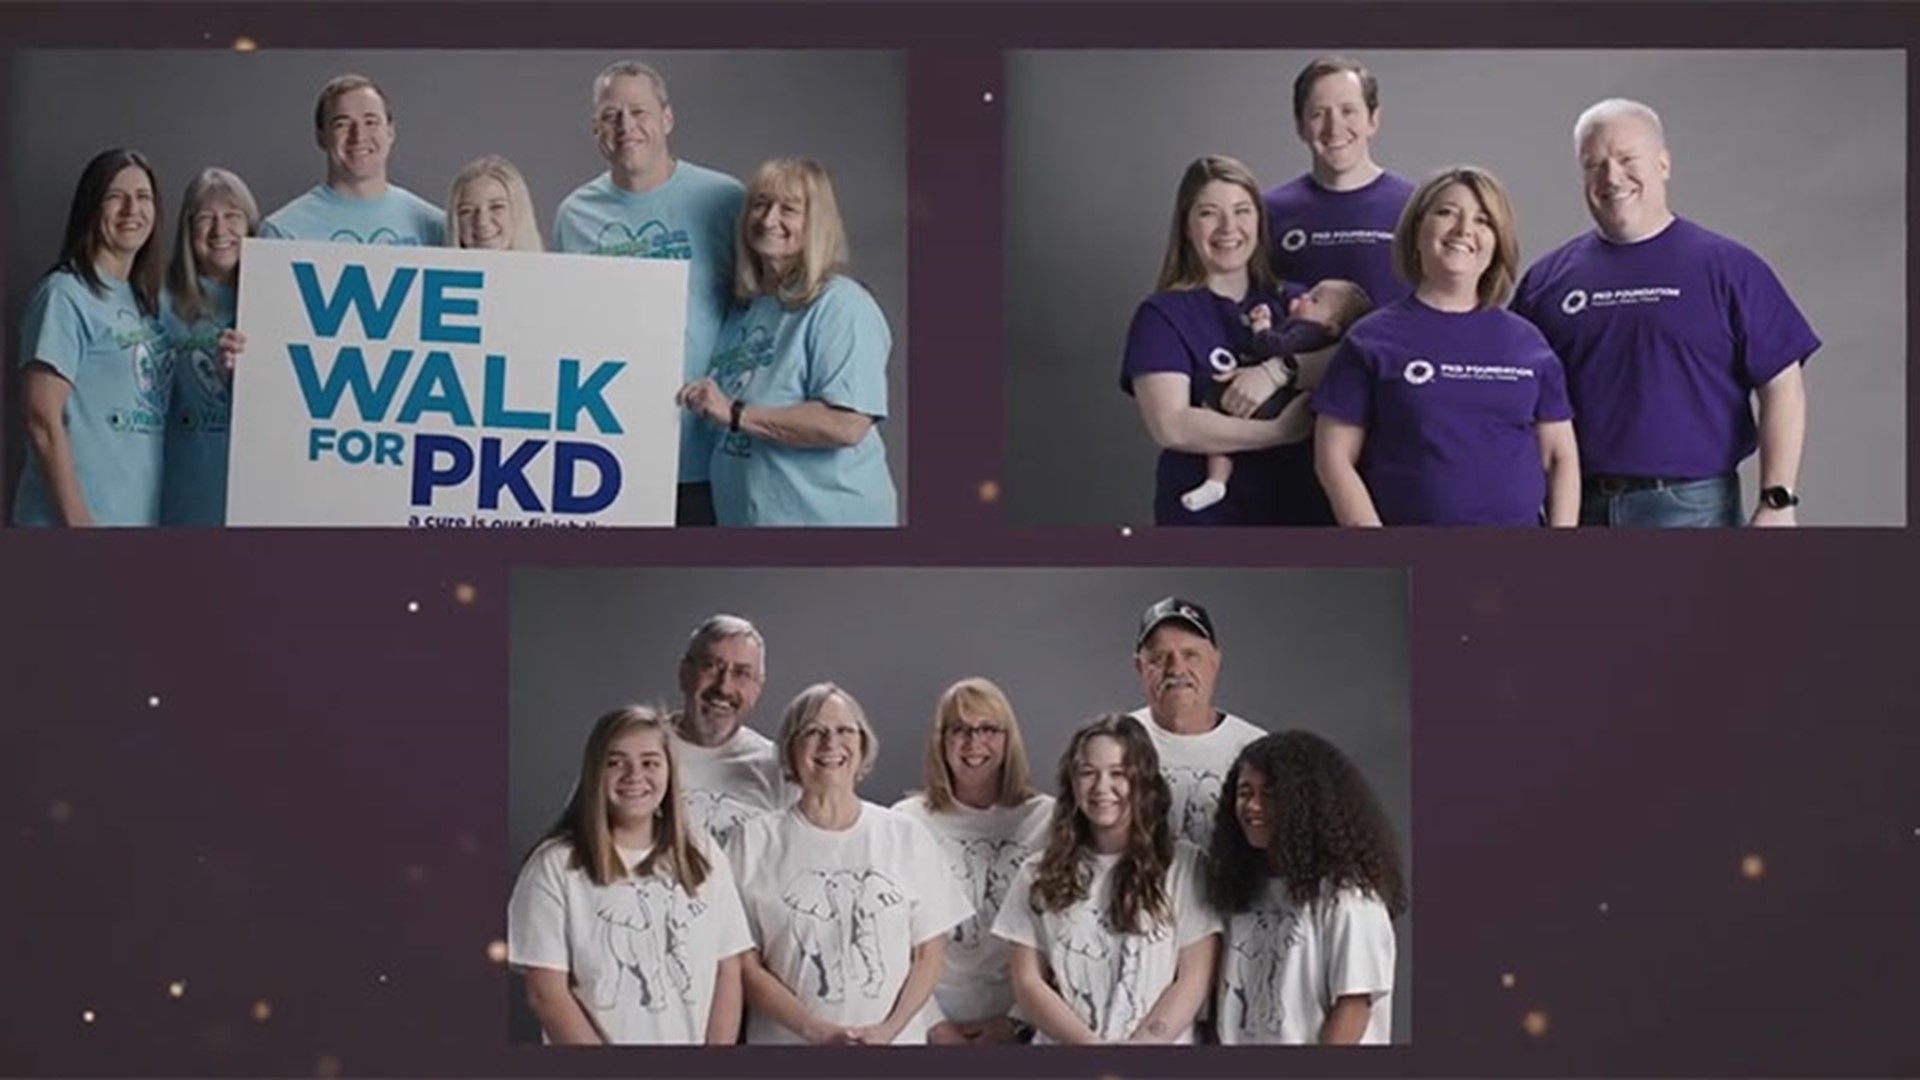 This year's walk is a virtual event to raise funds and unite in the fight to end PKD.